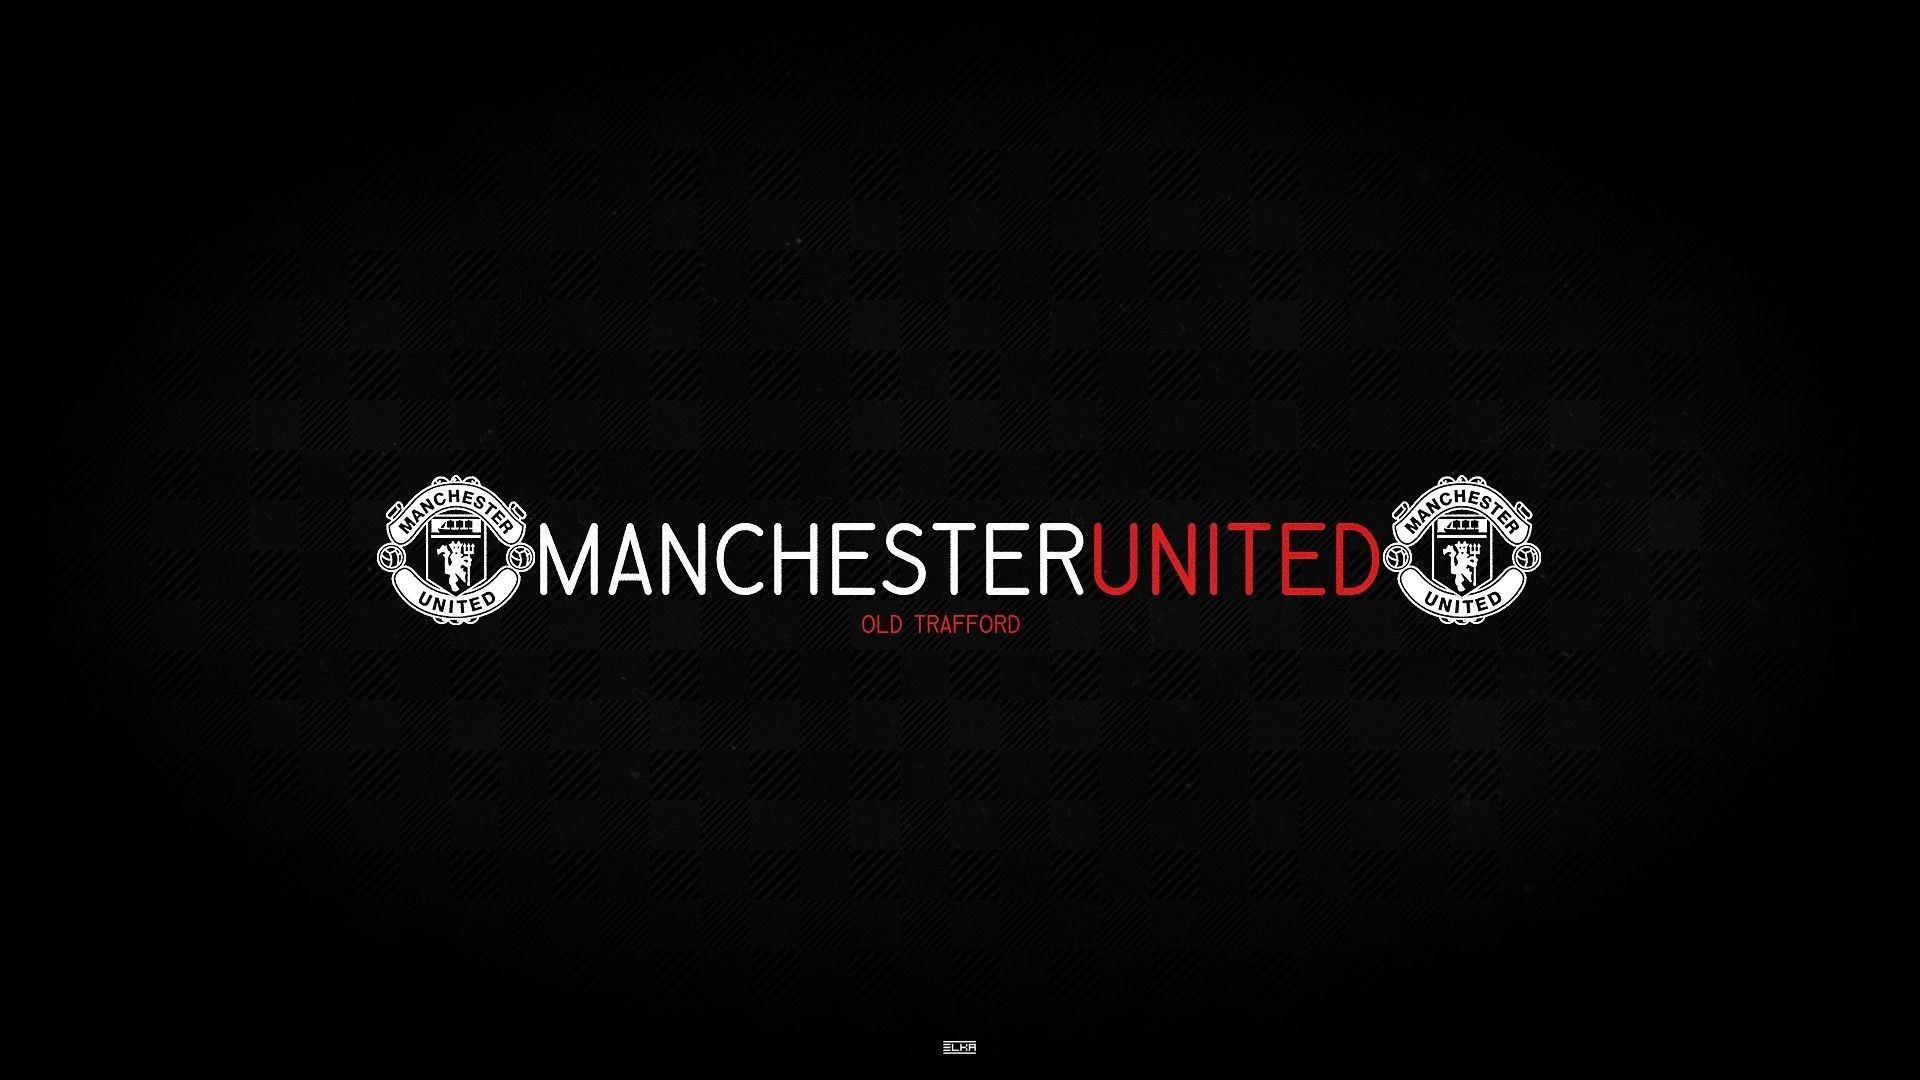 Manchester United Wallpapers Hd Wallpaper 1920x1080 1920x1080